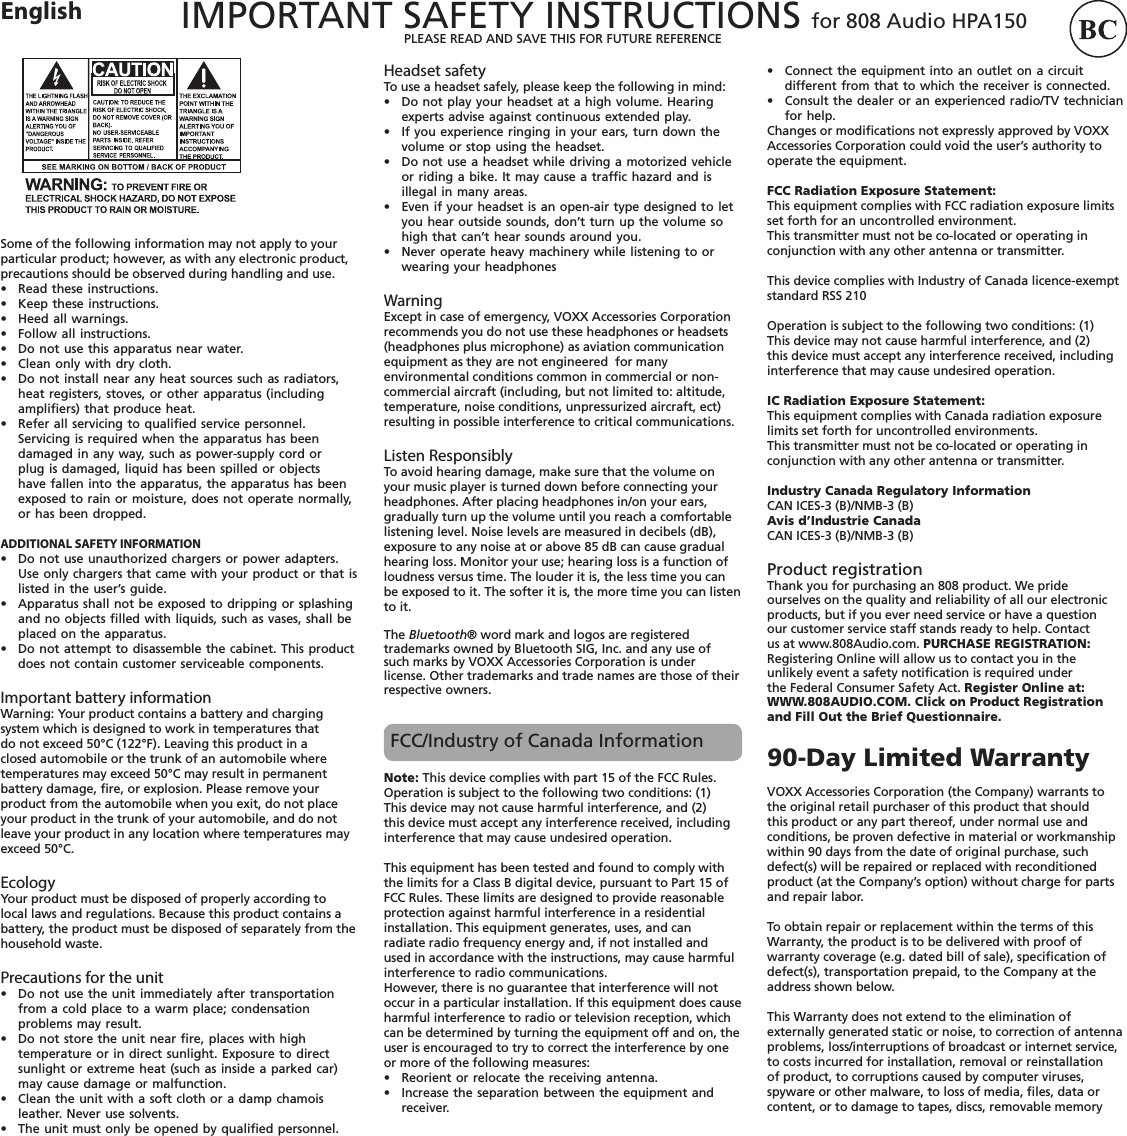 IMPORTANT SAFETY INSTRUCTIONS for 808 Audio HPA150 PLEASE READ AND SAVE THIS FOR FUTURE REFERENCEEnglishSome of the following information may not apply to your particular product; however, as with any electronic product, precautions should be observed during handling and use.•  Read these instructions. •  Keep these instructions. •  Heed all warnings. •  Follow all instructions. •  Do not use this apparatus near water. •  Clean only with dry cloth. •  Do not install near any heat sources such as radiators, heat registers, stoves, or other apparatus (including ampliﬁers) that produce heat. •  Refer all servicing to qualiﬁed service personnel. Servicing is required when the apparatus has been damaged in any way, such as power-supply cord or plug is damaged, liquid has been spilled or objects have fallen into the apparatus, the apparatus has been exposed to rain or moisture, does not operate normally, or has been dropped. ADDITIONAL SAFETY INFORMATION•  Do not use unauthorized chargers or power adapters. Use only chargers that came with your product or that is listed in the user’s guide.•   Apparatus shall not be exposed to dripping or splashing and no objects ﬁlled with liquids, such as vases, shall be placed on the apparatus.•   Do not attempt to disassemble the cabinet. This product does not contain customer serviceable components.Important battery informationWarning: Your product contains a battery and charging system which is designed to work in temperatures that do not exceed 50°C (122°F). Leaving this product in a closed automobile or the trunk of an automobile where temperatures may exceed 50°C may result in permanent battery damage, ﬁre, or explosion. Please remove your product from the automobile when you exit, do not place your product in the trunk of your automobile, and do not leave your product in any location where temperatures may exceed 50°C.Ecology Your product must be disposed of properly according to local laws and regulations. Because this product contains a battery, the product must be disposed of separately from the household waste.Precautions for the unit•  Do not use the unit immediately after transportation from a cold place to a warm place; condensation problems may result. •  Do not store the unit near ﬁre, places with high temperature or in direct sunlight. Exposure to direct sunlight or extreme heat (such as inside a parked car) may cause damage or malfunction.•  Clean the unit with a soft cloth or a damp chamois leather. Never use solvents.•  The unit must only be opened by qualiﬁed personnel.Headset safety To use a headset safely, please keep the following in mind:•  Do not play your headset at a high volume. Hearing experts advise against continuous extended play.•  If you experience ringing in your ears, turn down the volume or stop using the headset.•  Do not use a headset while driving a motorized vehicle or riding a bike. It may cause a trafﬁc hazard and is illegal in many areas.•  Even if your headset is an open-air type designed to let you hear outside sounds, don’t turn up the volume so high that can’t hear sounds around you.•  Never operate heavy machinery while listening to or wearing your headphonesWarning Except in case of emergency, VOXX Accessories Corporation recommends you do not use these headphones or headsets (headphones plus microphone) as aviation communication equipment as they are not engineered  for many environmental conditions common in commercial or non-commercial aircraft (including, but not limited to: altitude, temperature, noise conditions, unpressurized aircraft, ect) resulting in possible interference to critical communications.Listen ResponsiblyTo avoid hearing damage, make sure that the volume on your music player is turned down before connecting your headphones. After placing headphones in/on your ears, gradually turn up the volume until you reach a comfortable listening level. Noise levels are measured in decibels (dB), exposure to any noise at or above 85 dB can cause gradual hearing loss. Monitor your use; hearing loss is a function of loudness versus time. The louder it is, the less time you can be exposed to it. The softer it is, the more time you can listen to it.The Bluetooth® word mark and logos are registered trademarks owned by Bluetooth SIG, Inc. and any use ofsuch marks by VOXX Accessories Corporation is under license. Other trademarks and trade names are those of their respective owners.FCC/Industry of Canada Information •   Connect the equipment into an outlet on a circuit different from that to which the receiver is connected.•   Consult the dealer or an experienced radio/TV technician for help.Changes or modiﬁcations not expressly approved by VOXX Accessories Corporation could void the user’s authority to operate the equipment.FCC Radiation Exposure Statement:This equipment complies with FCC radiation exposure limits set forth for an uncontrolled environment. This transmitter must not be co-located or operating in conjunction with any other antenna or transmitter.This device complies with Industry of Canada licence-exempt standard RSS 210Operation is subject to the following two conditions: (1) This device may not cause harmful interference, and (2) this device must accept any interference received, including interference that may cause undesired operation.IC Radiation Exposure Statement:This equipment complies with Canada radiation exposure limits set forth for uncontrolled environments. This transmitter must not be co-located or operating in conjunction with any other antenna or transmitter.Industry Canada Regulatory InformationCAN ICES-3 (B)/NMB-3 (B)Avis d’Industrie CanadaCAN ICES-3 (B)/NMB-3 (B)Product registrationThank you for purchasing an 808 product. We pride ourselves on the quality and reliability of all our electronic products, but if you ever need service or have a question our customer service staff stands ready to help. Contact us at www.808Audio.com. PURCHASE REGISTRATION: Registering Online will allow us to contact you in the unlikely event a safety notiﬁcation is required under the Federal Consumer Safety Act. Register Online at: WWW.808AUDIO.COM. Click on Product Registration and Fill Out the Brief Questionnaire.90-Day Limited WarrantyVOXX Accessories Corporation (the Company) warrants to the original retail purchaser of this product that should this product or any part thereof, under normal use and conditions, be proven defective in material or workmanship within 90 days from the date of original purchase, such defect(s) will be repaired or replaced with reconditioned product (at the Company’s option) without charge for parts and repair labor.To obtain repair or replacement within the terms of this Warranty, the product is to be delivered with proof of warranty coverage (e.g. dated bill of sale), speciﬁcation of defect(s), transportation prepaid, to the Company at the address shown below.This Warranty does not extend to the elimination of externally generated static or noise, to correction of antenna problems, loss/interruptions of broadcast or internet service, to costs incurred for installation, removal or reinstallation of product, to corruptions caused by computer viruses, spyware or other malware, to loss of media, ﬁles, data or content, or to damage to tapes, discs, removable memory Note: This device complies with part 15 of the FCC Rules. Operation is subject to the following two conditions: (1) This device may not cause harmful interference, and (2) this device must accept any interference received, including interference that may cause undesired operation. This equipment has been tested and found to comply with the limits for a Class B digital device, pursuant to Part 15 of FCC Rules. These limits are designed to provide reasonable protection against harmful interference in a residential installation. This equipment generates, uses, and can radiate radio frequency energy and, if not installed and used in accordance with the instructions, may cause harmful interference to radio communications. However, there is no guarantee that interference will not occur in a particular installation. If this equipment does cause harmful interference to radio or television reception, which can be determined by turning the equipment off and on, the user is encouraged to try to correct the interference by one or more of the following measures:•   Reorient or relocate the receiving antenna.•   Increase the separation between the equipment and receiver.